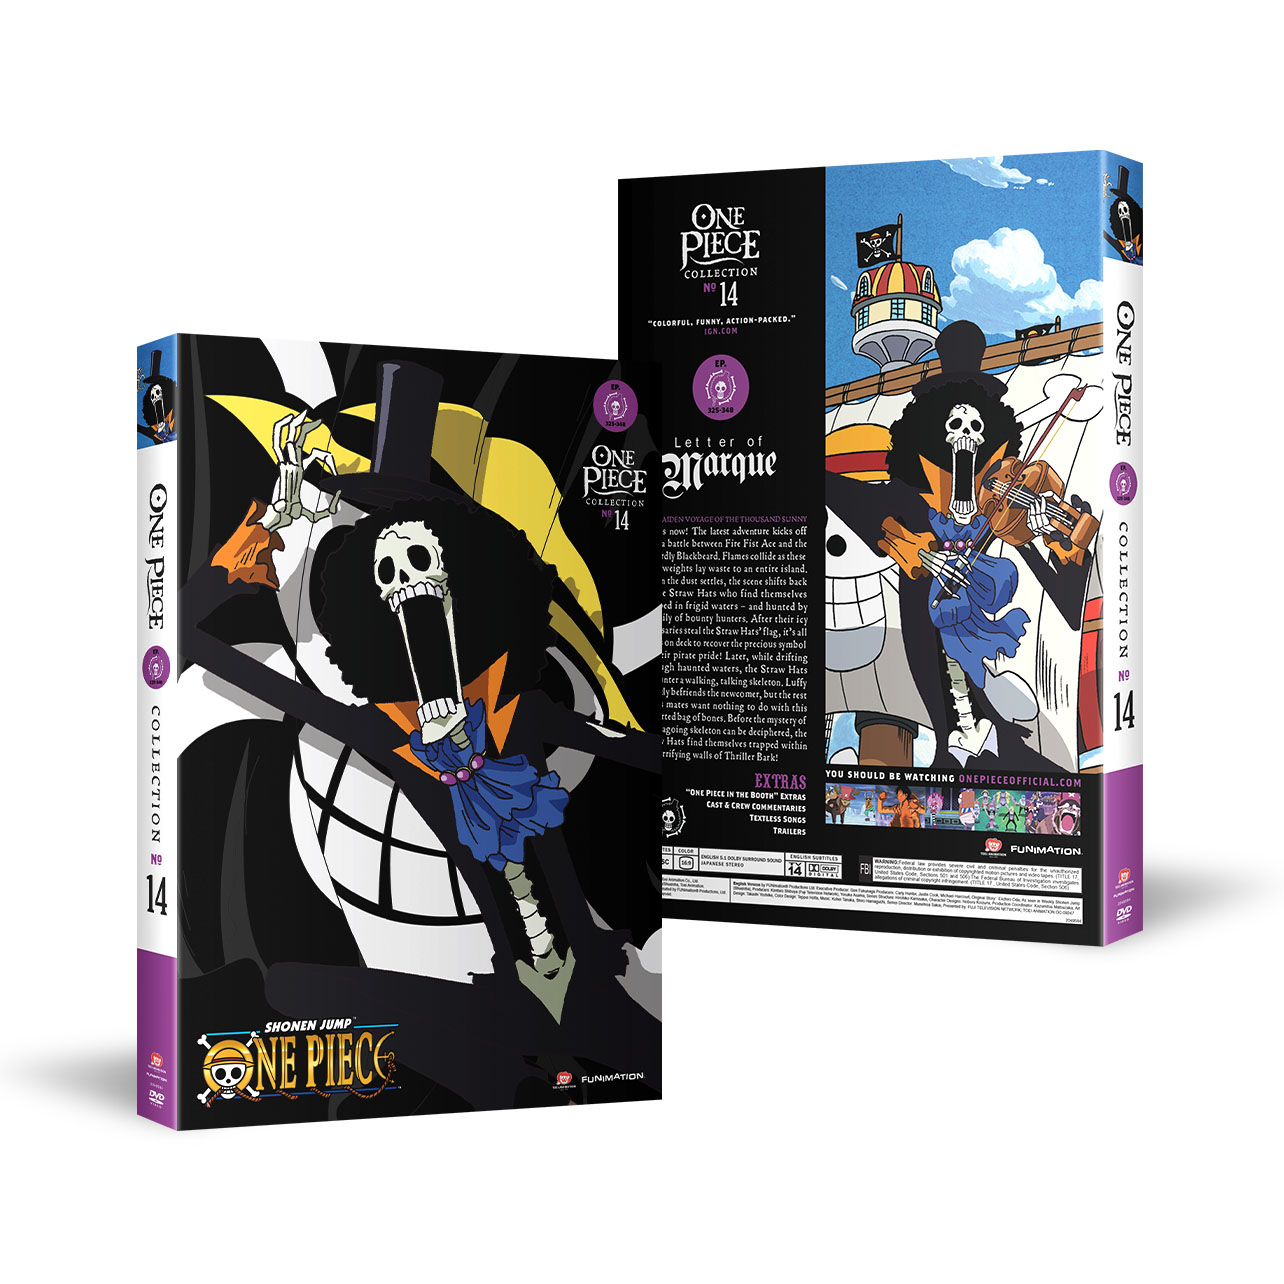 One Piece - Collection 14 - DVD image count 0